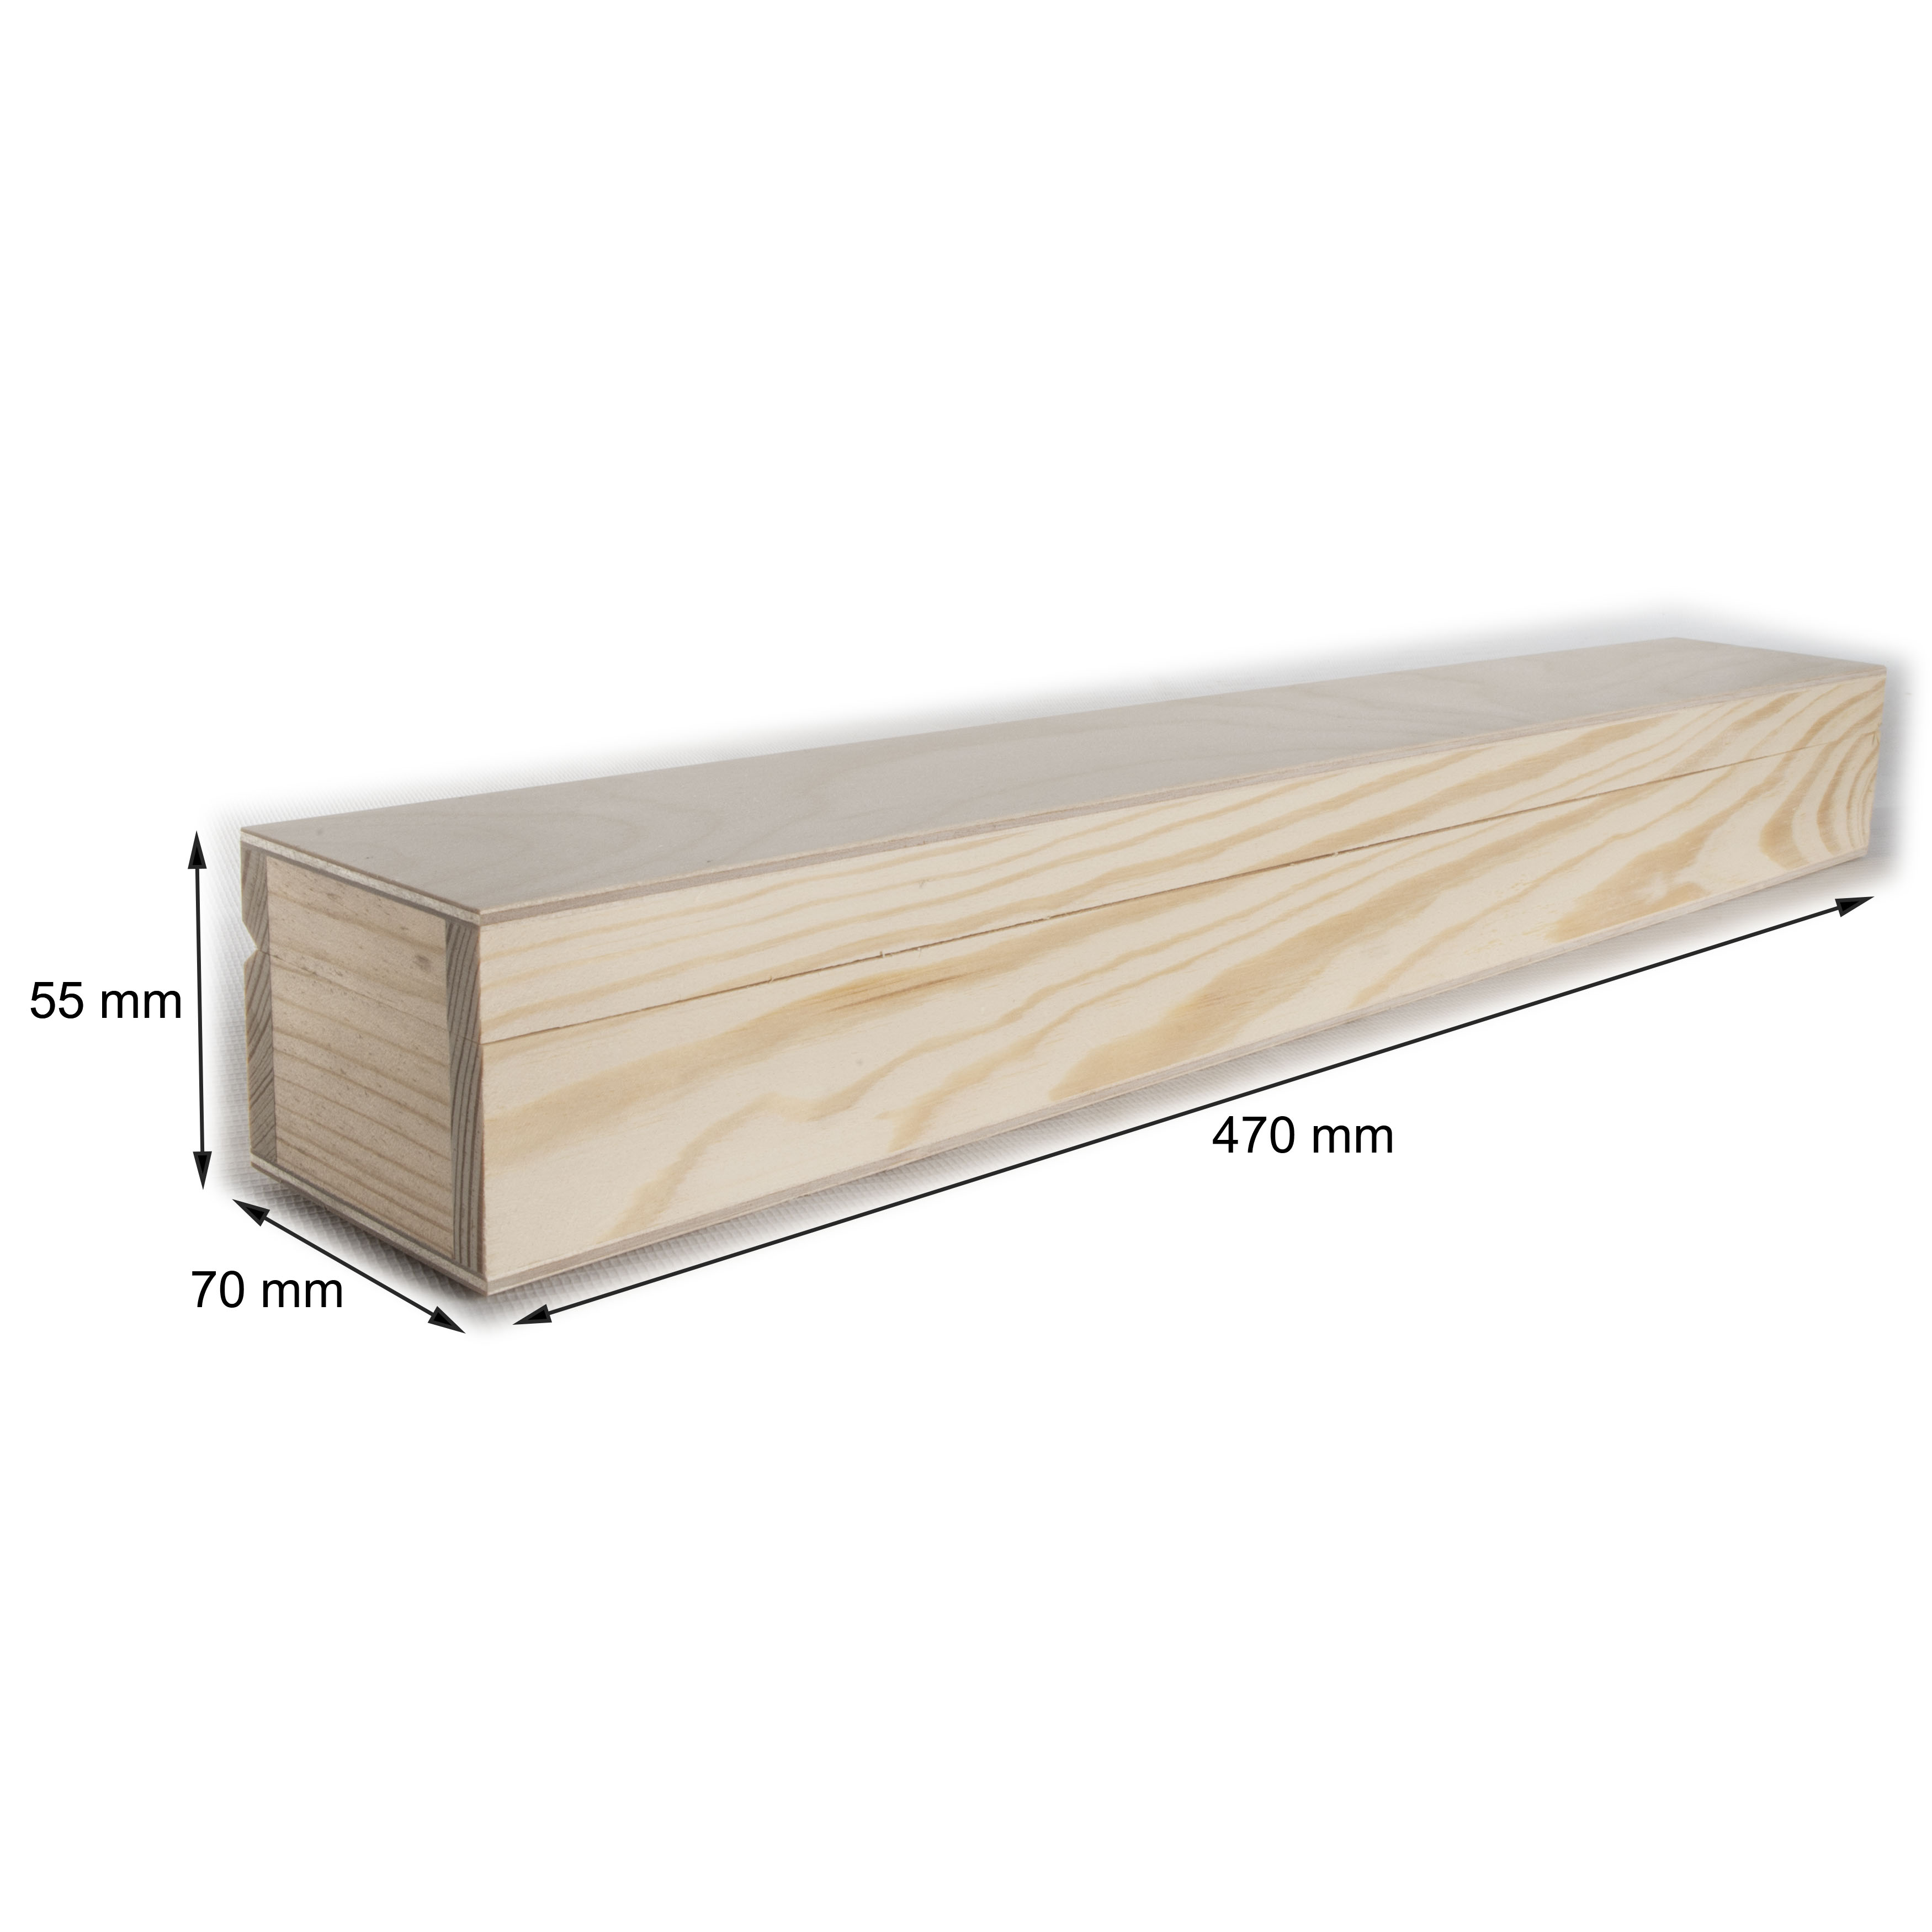 Oblong Long Rectangular Wooden Box with Lid | 47 x 7 x 5.5 cm | Candle ...